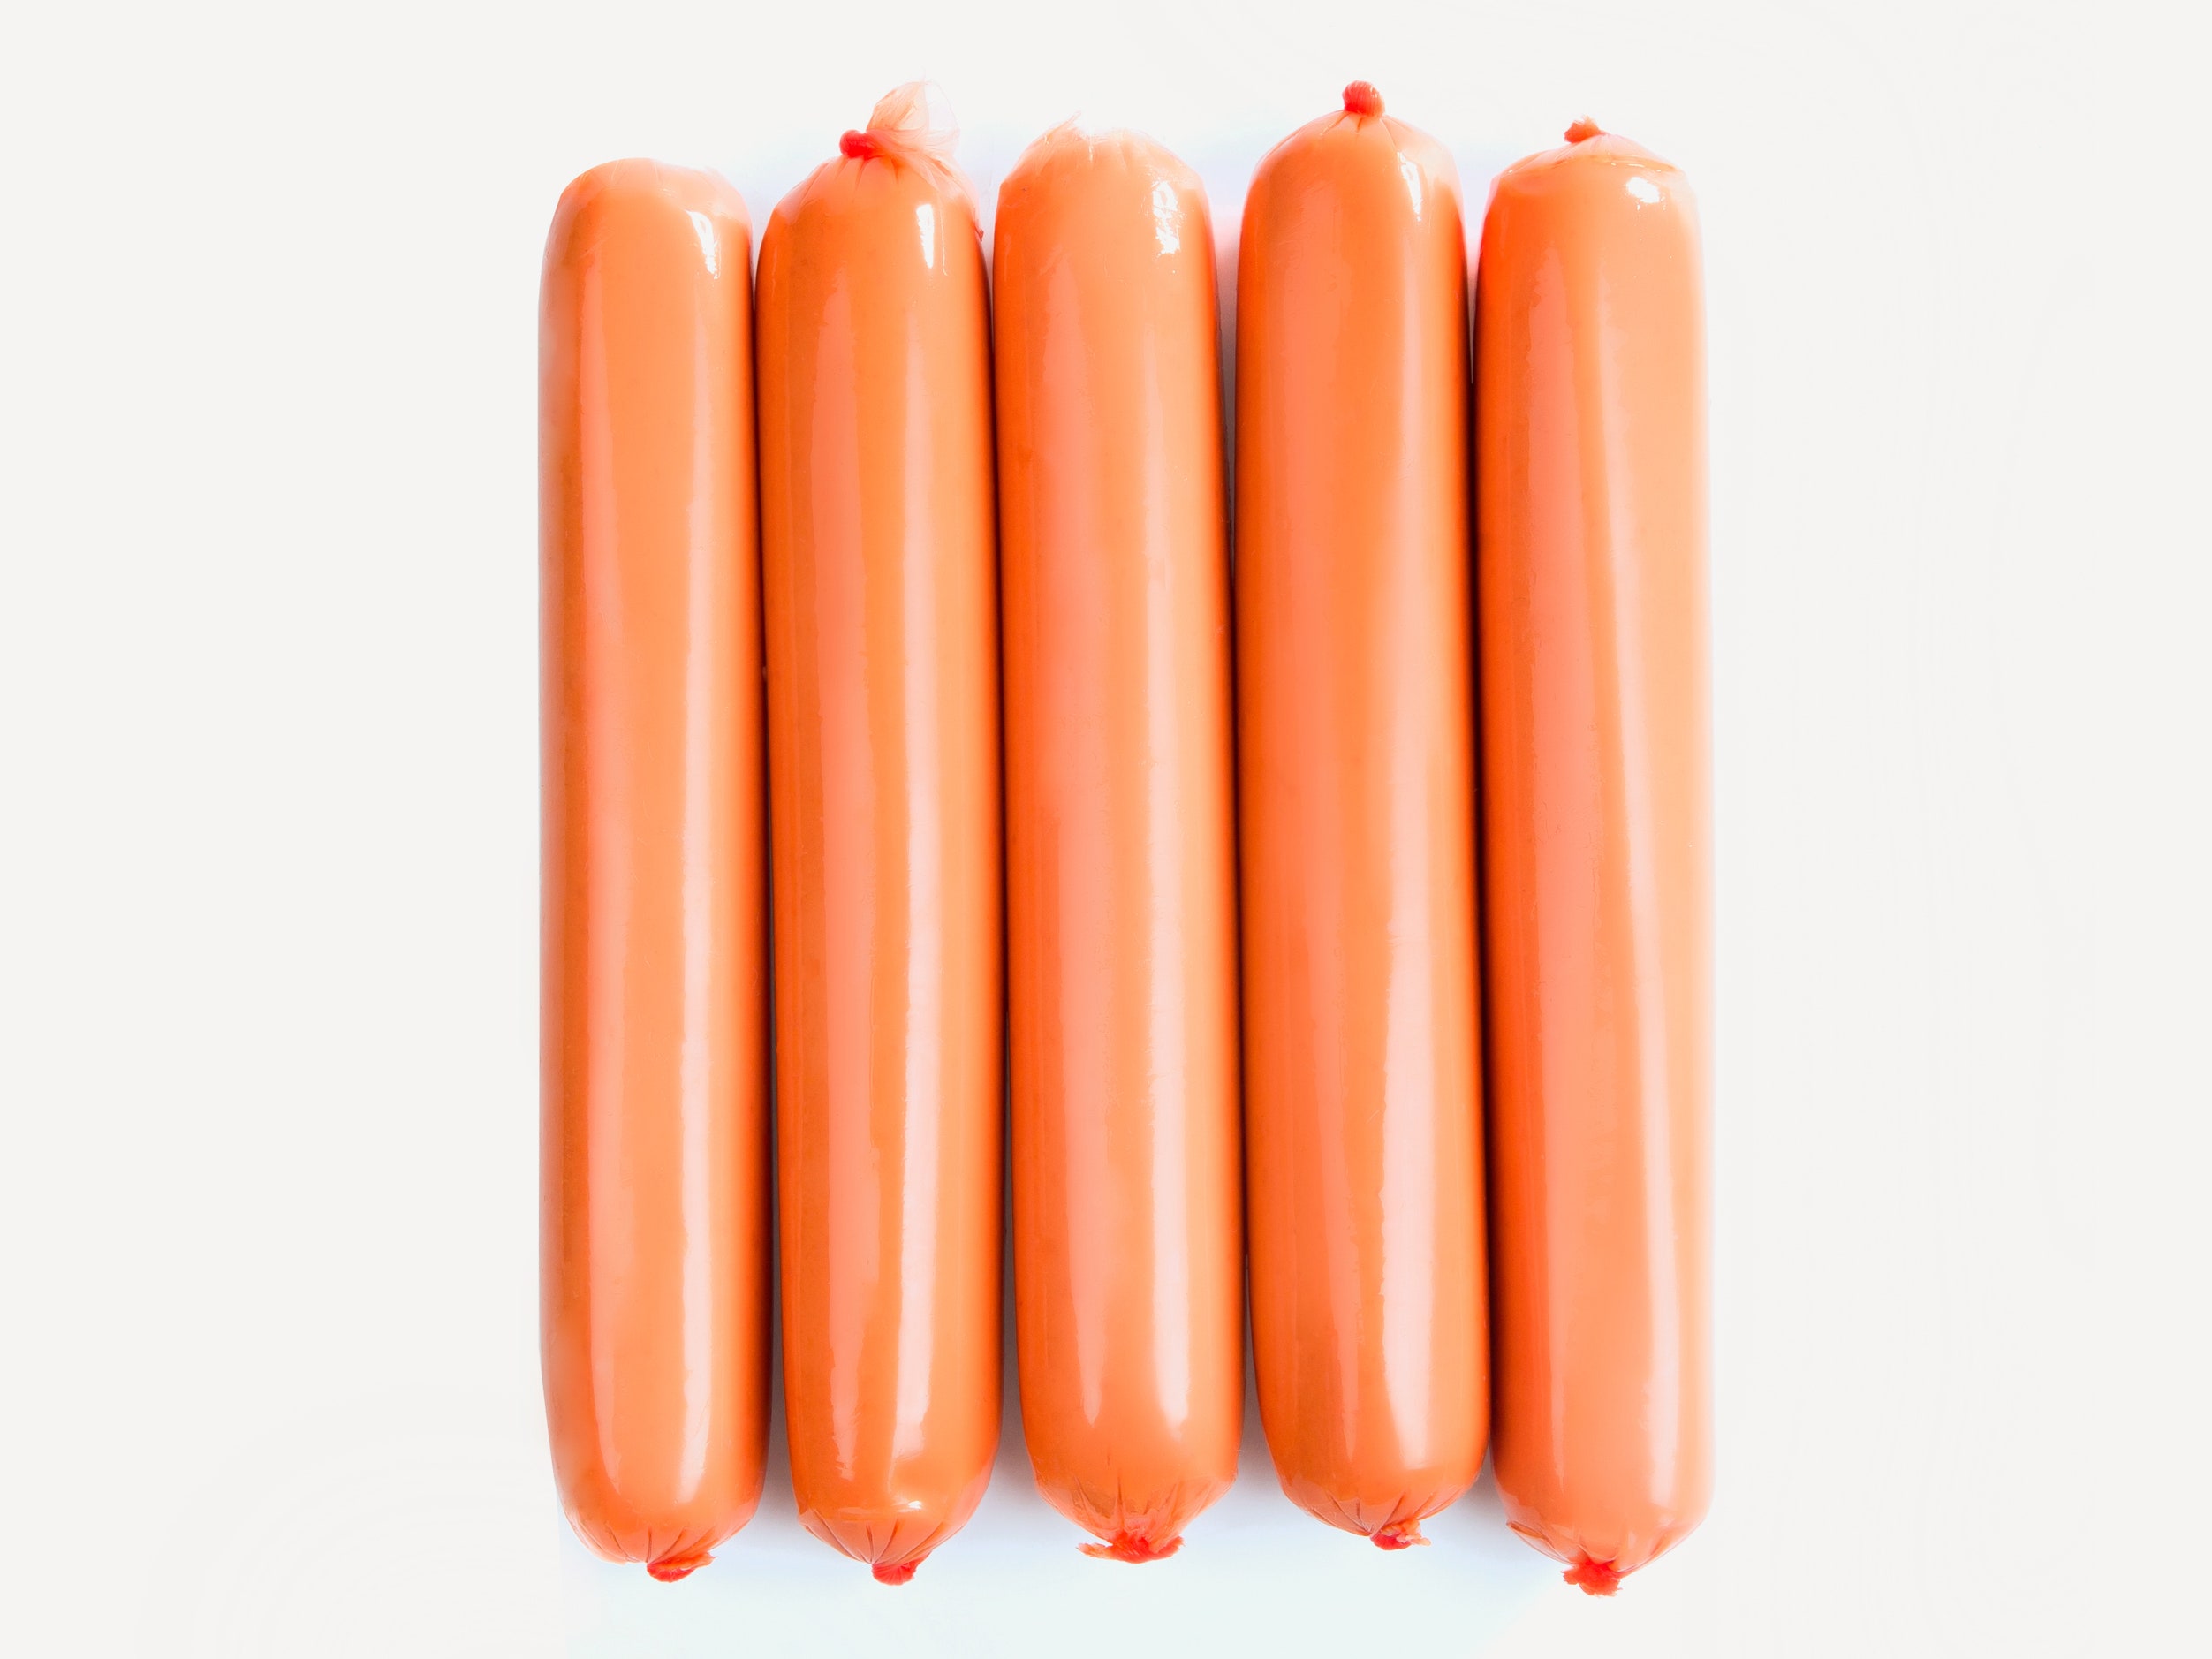 Detail Image Of Hot Dogs Nomer 16